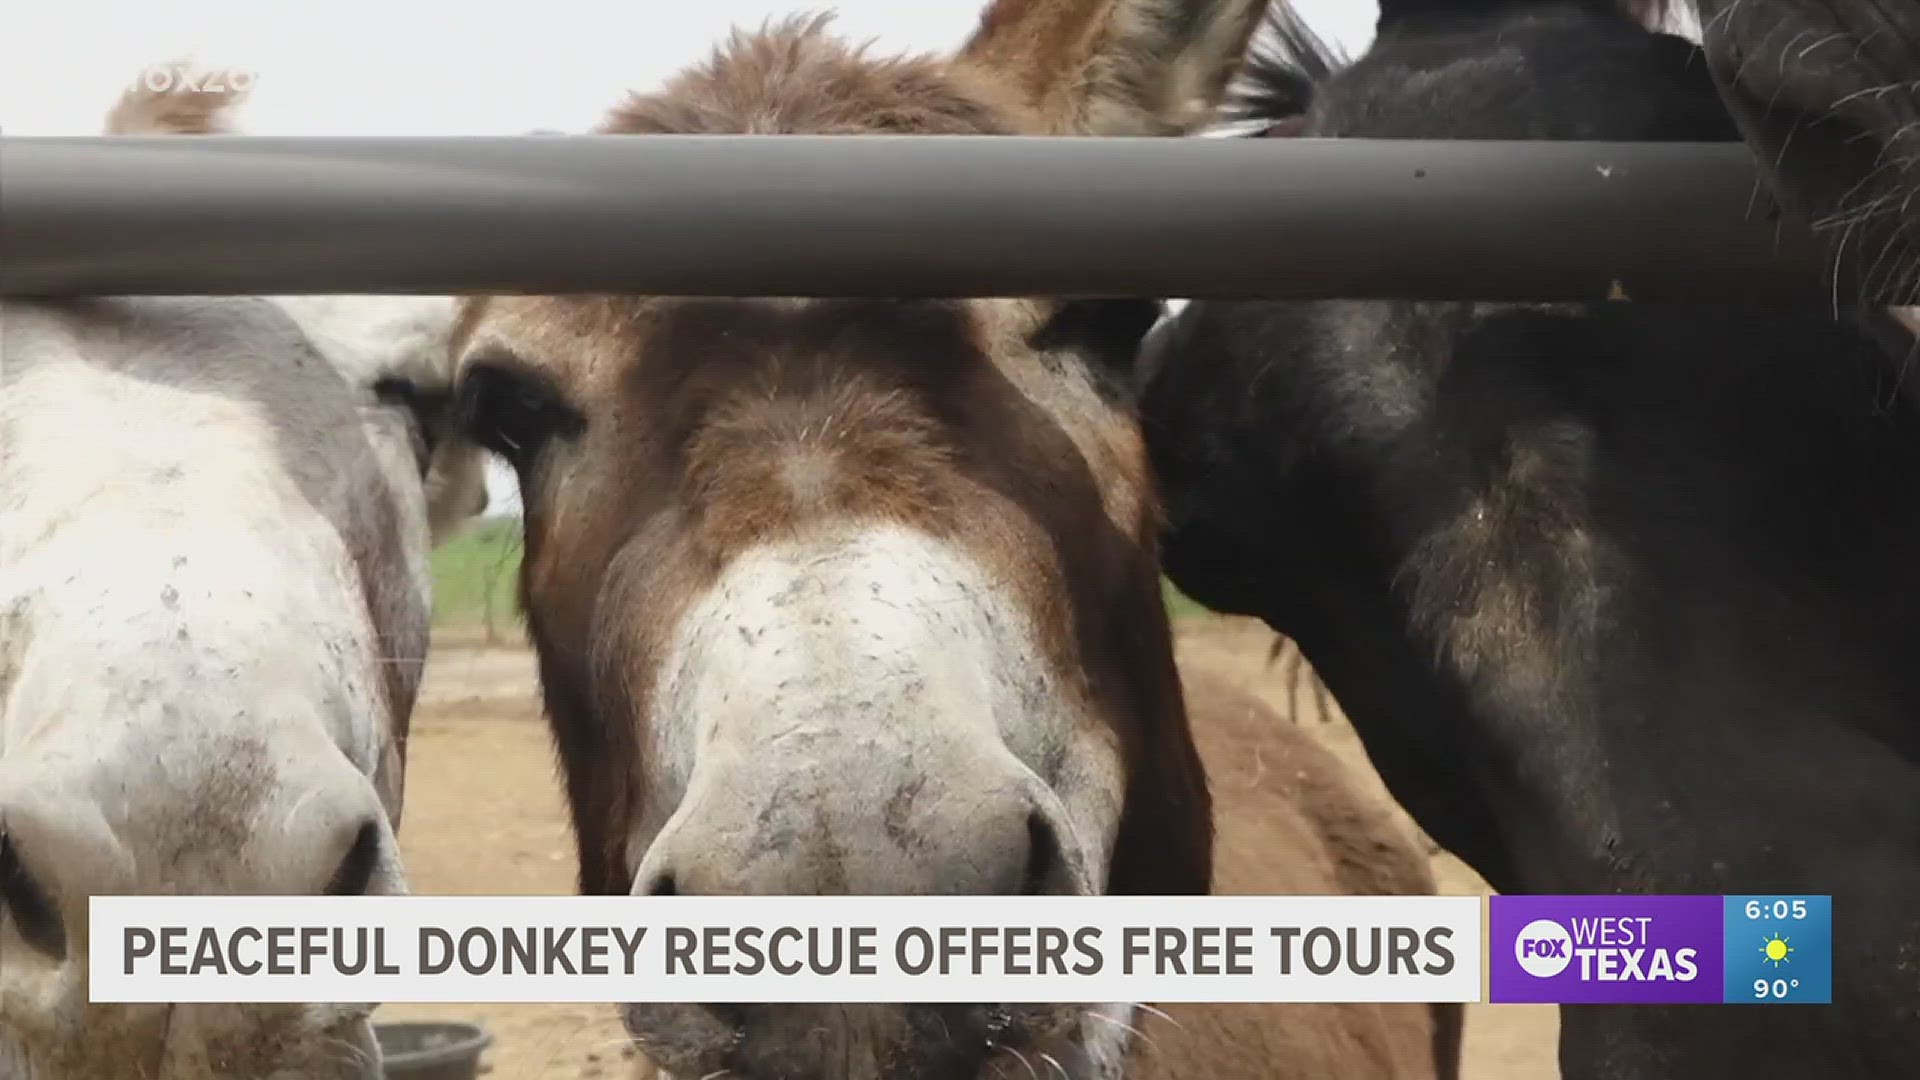 Peaceful Donkey Rescue is preparing to give free tours during its busiest time of the year.